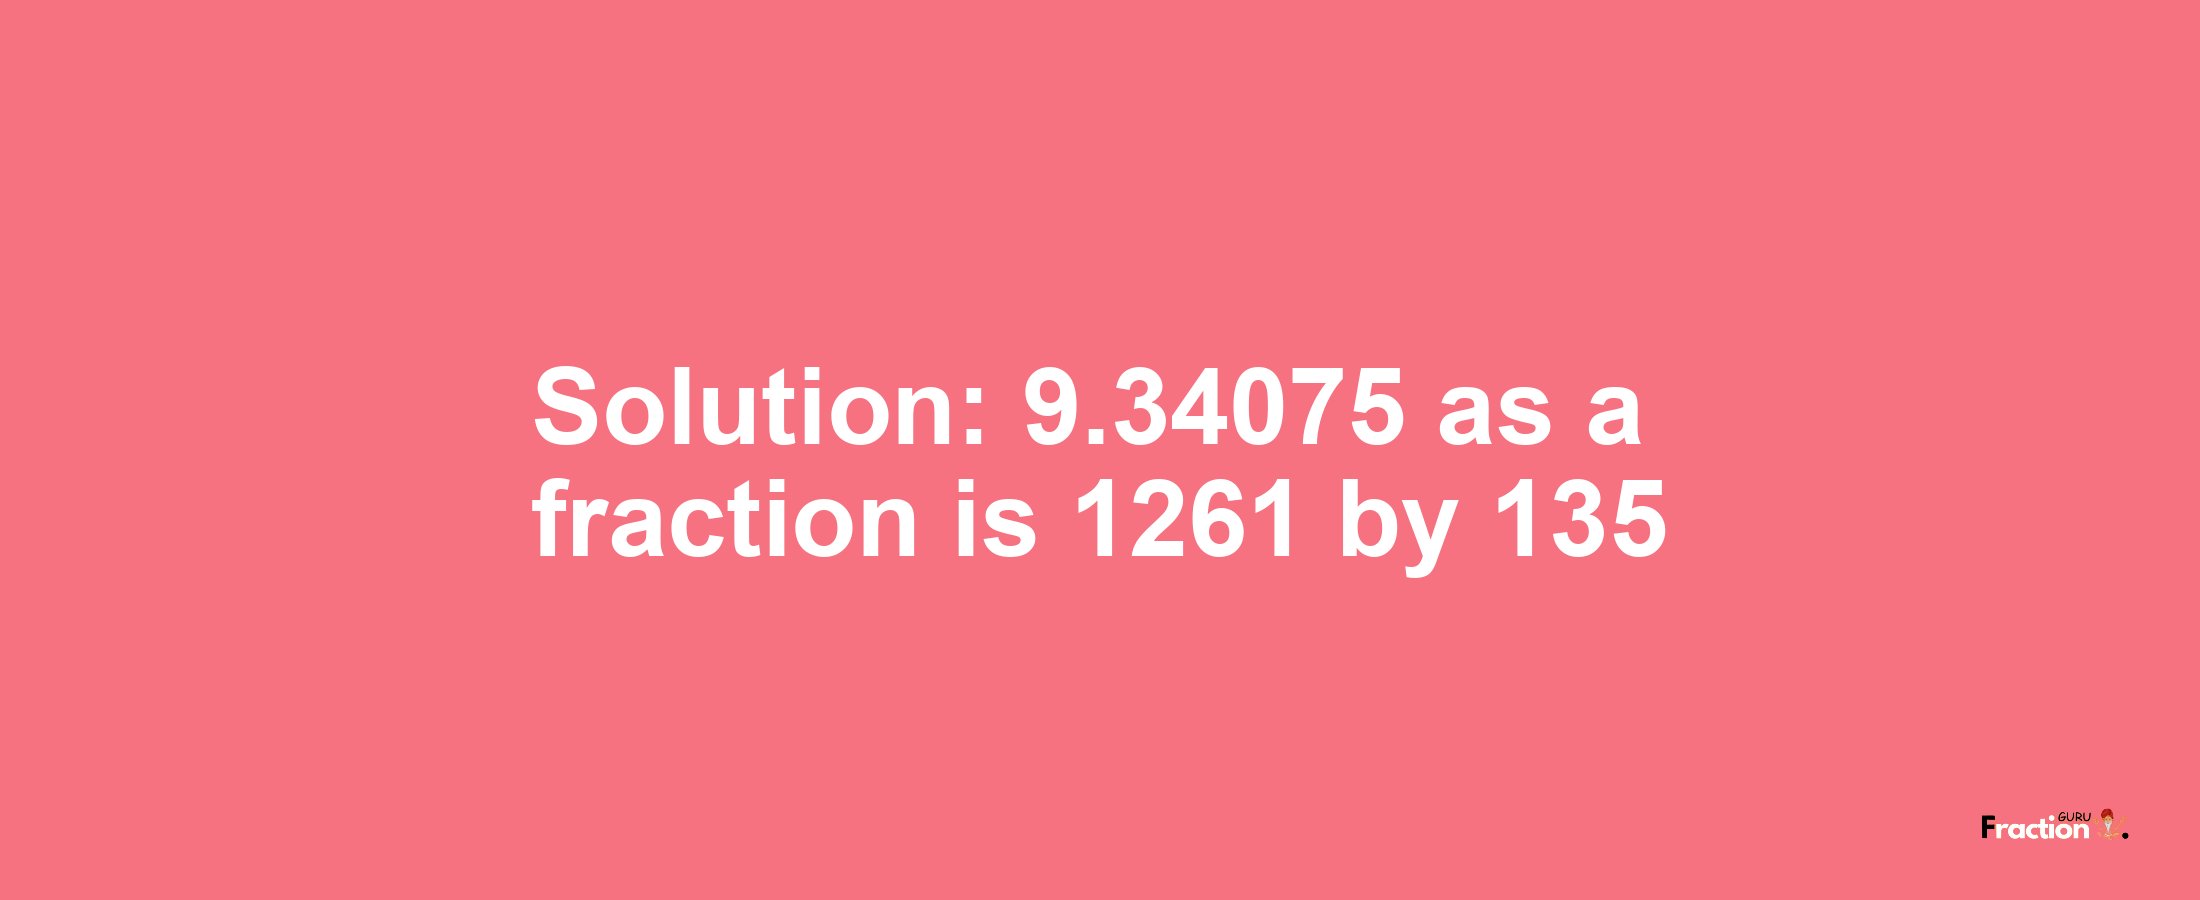 Solution:9.34075 as a fraction is 1261/135